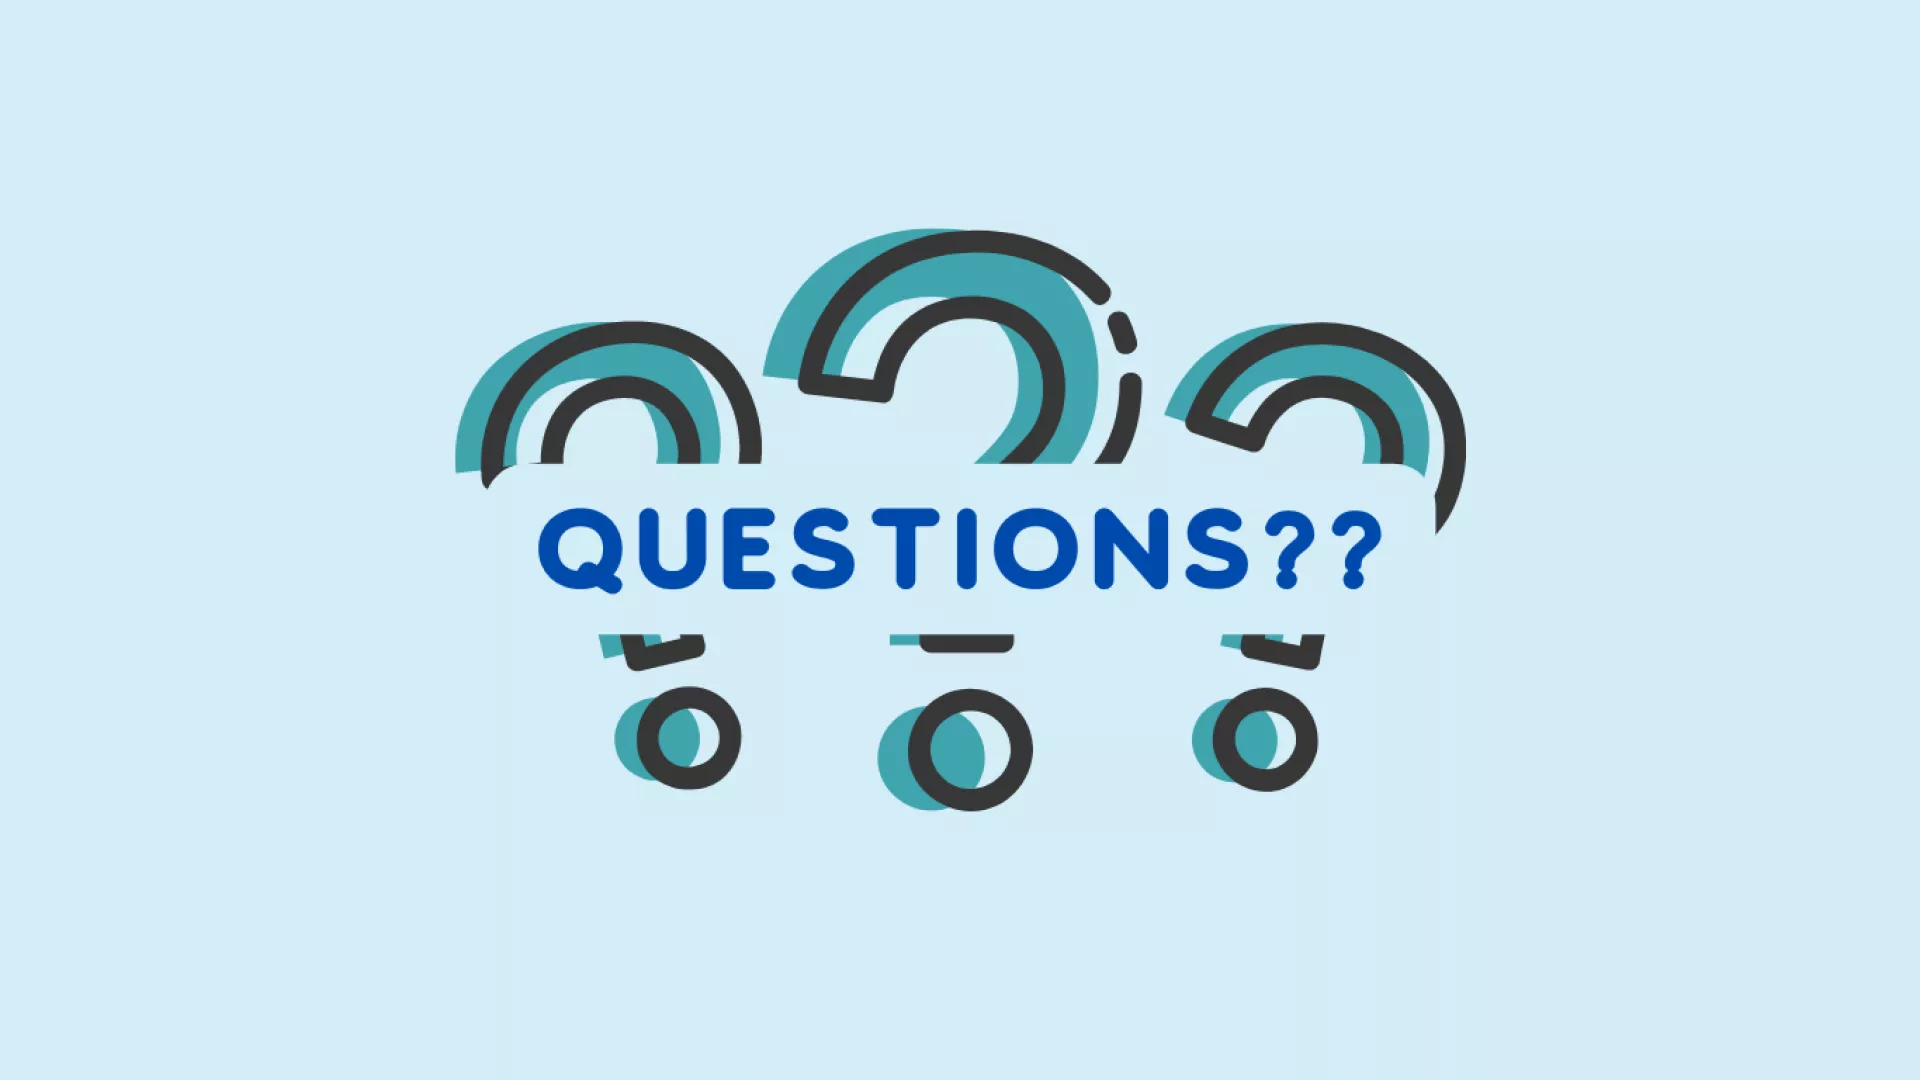 Dark blue text "Questions??" on light Blue background with teal question mark graphic in background. 